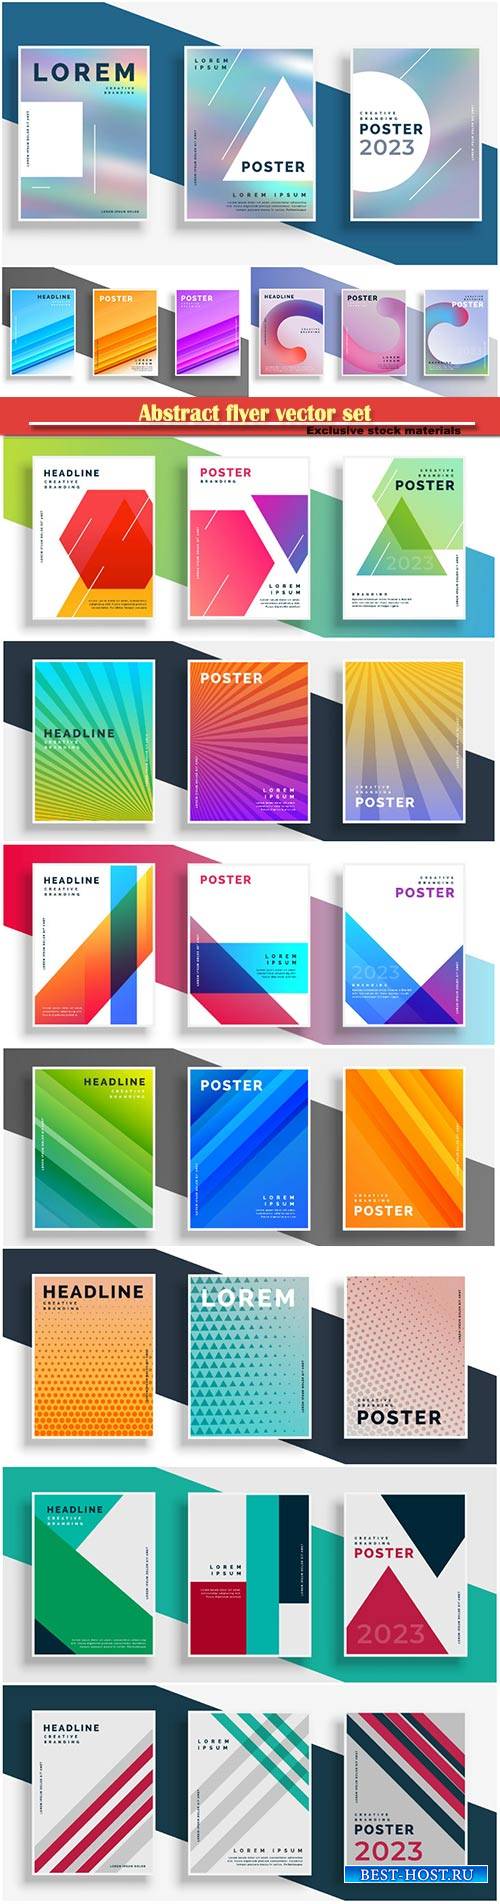 Abstract flyer vector set